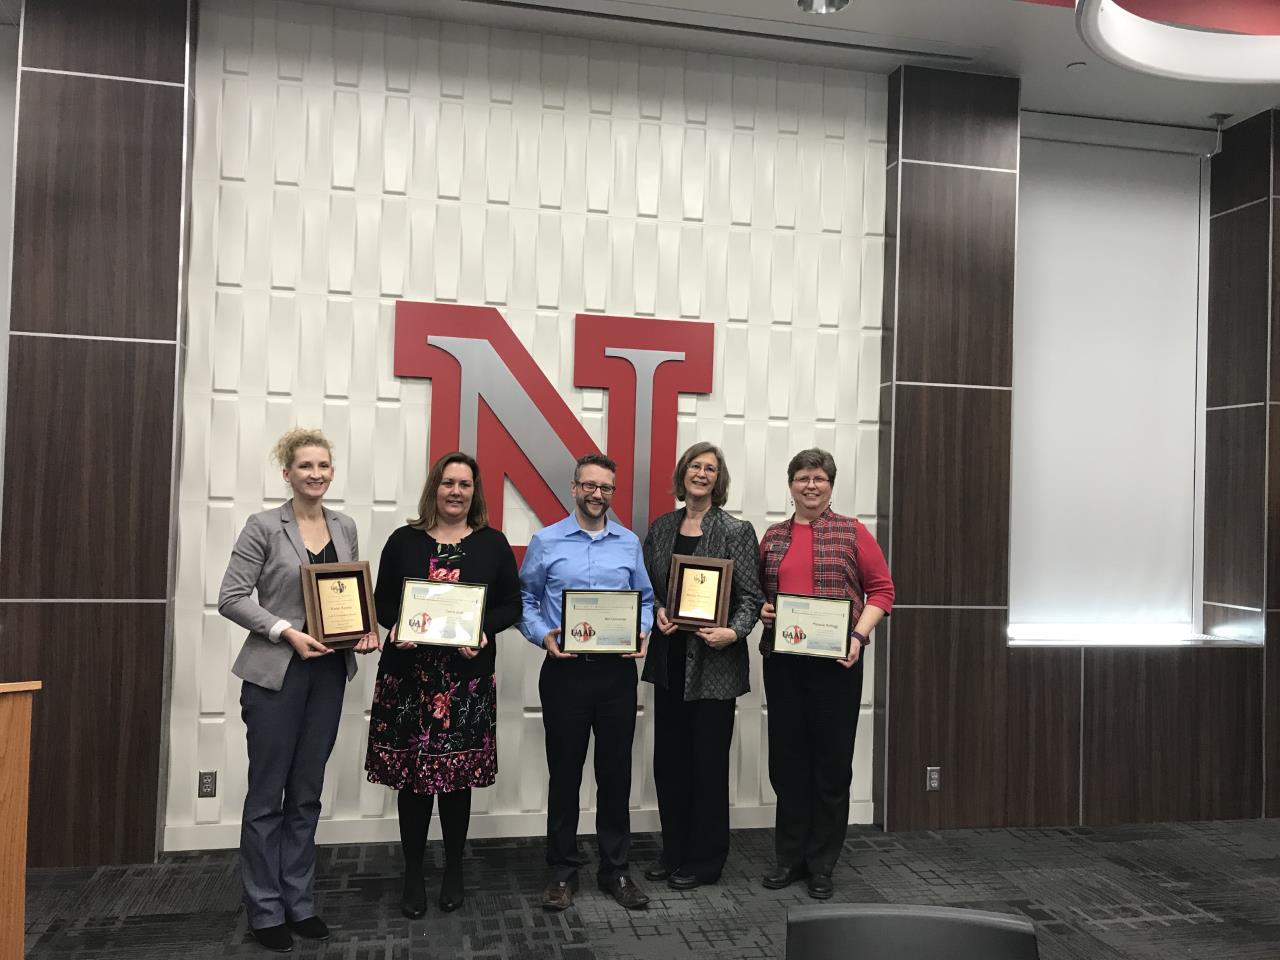 Ben Lennander was nominated for the Carl A. Donaldson Award for Excellence in Management, and Melanie Kellogg  was nominated for the Floyd S. Oldt Award for Exceptional Service and Dedication to the University. 